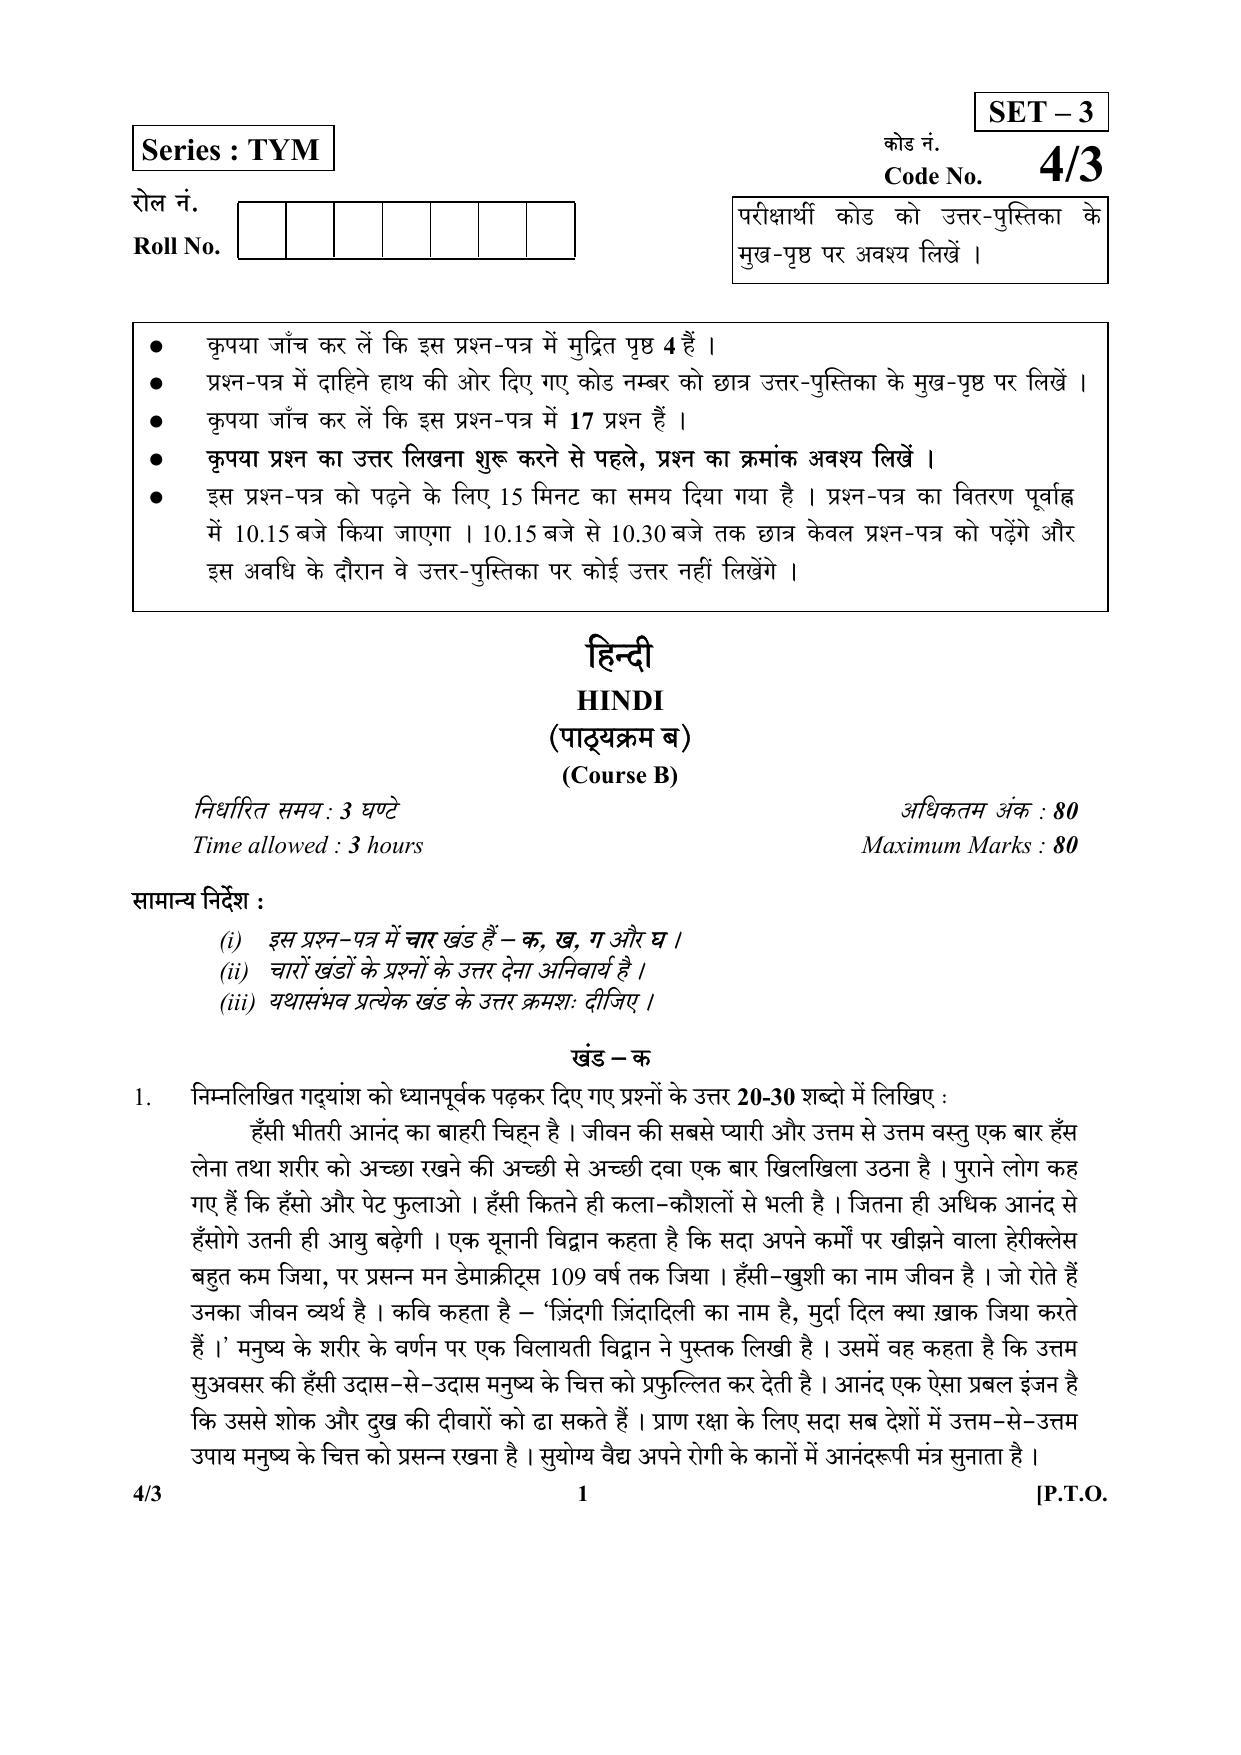 CBSE Class 10 4-3_Hindi SET-3 2018 Question Paper - Page 1